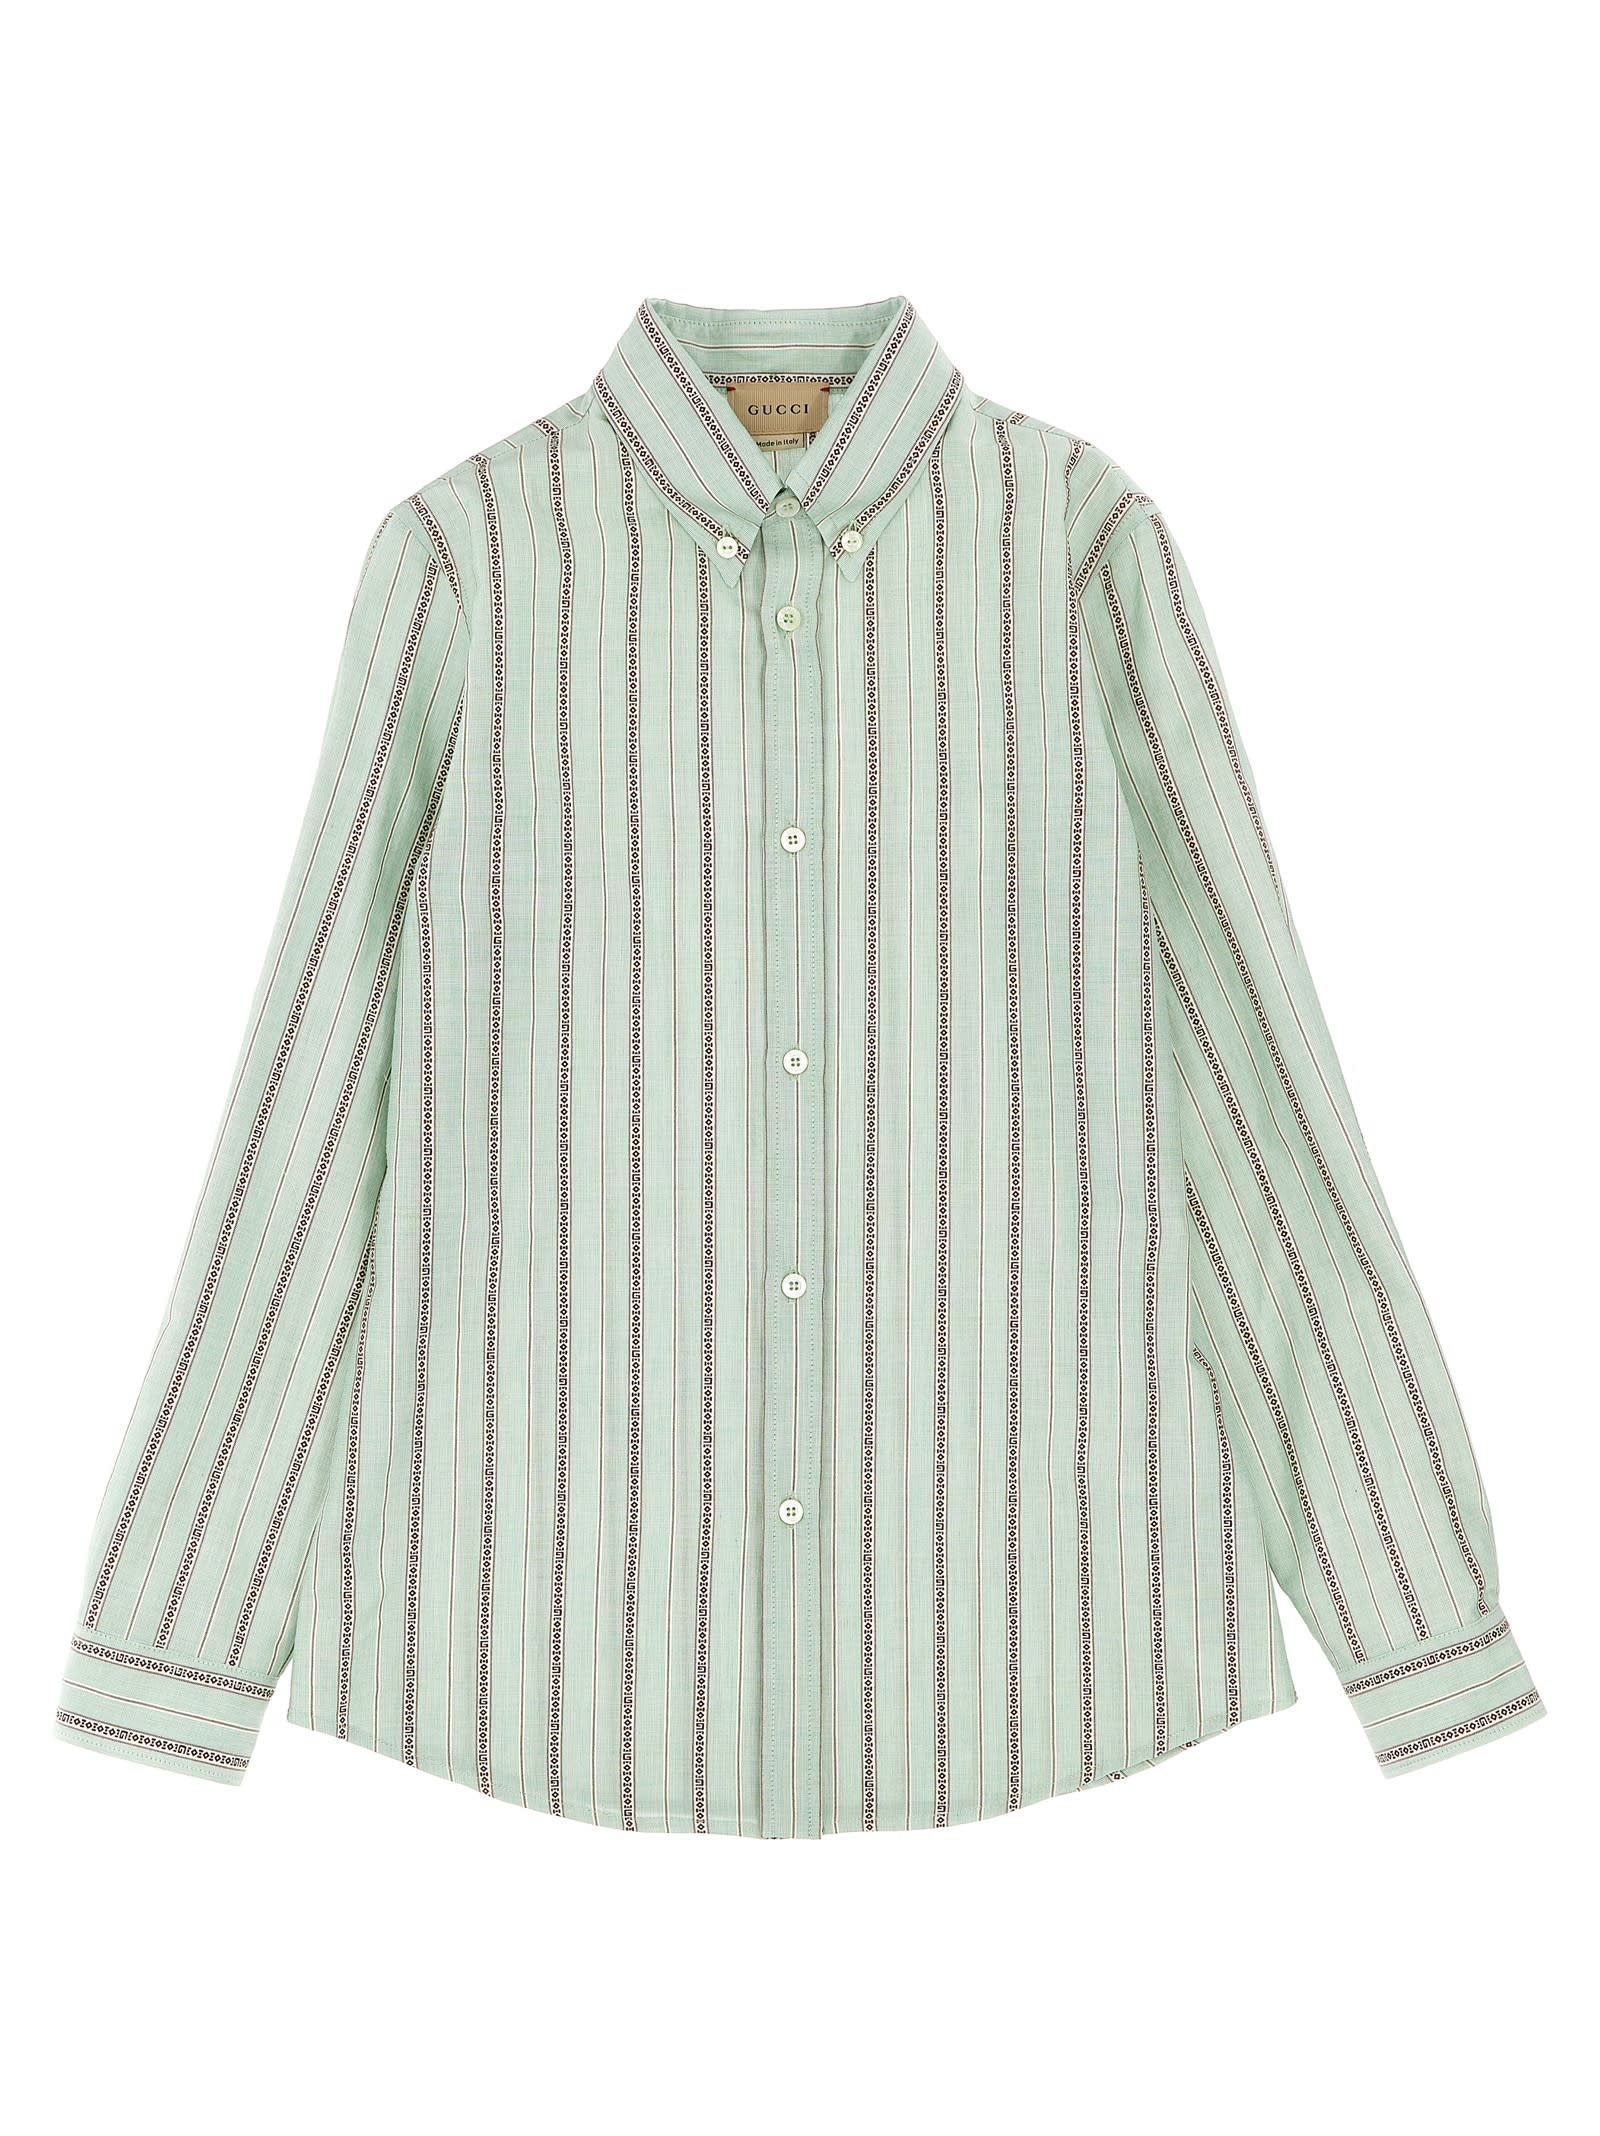 Gucci Kids' Patterned Striped Shirt In Green